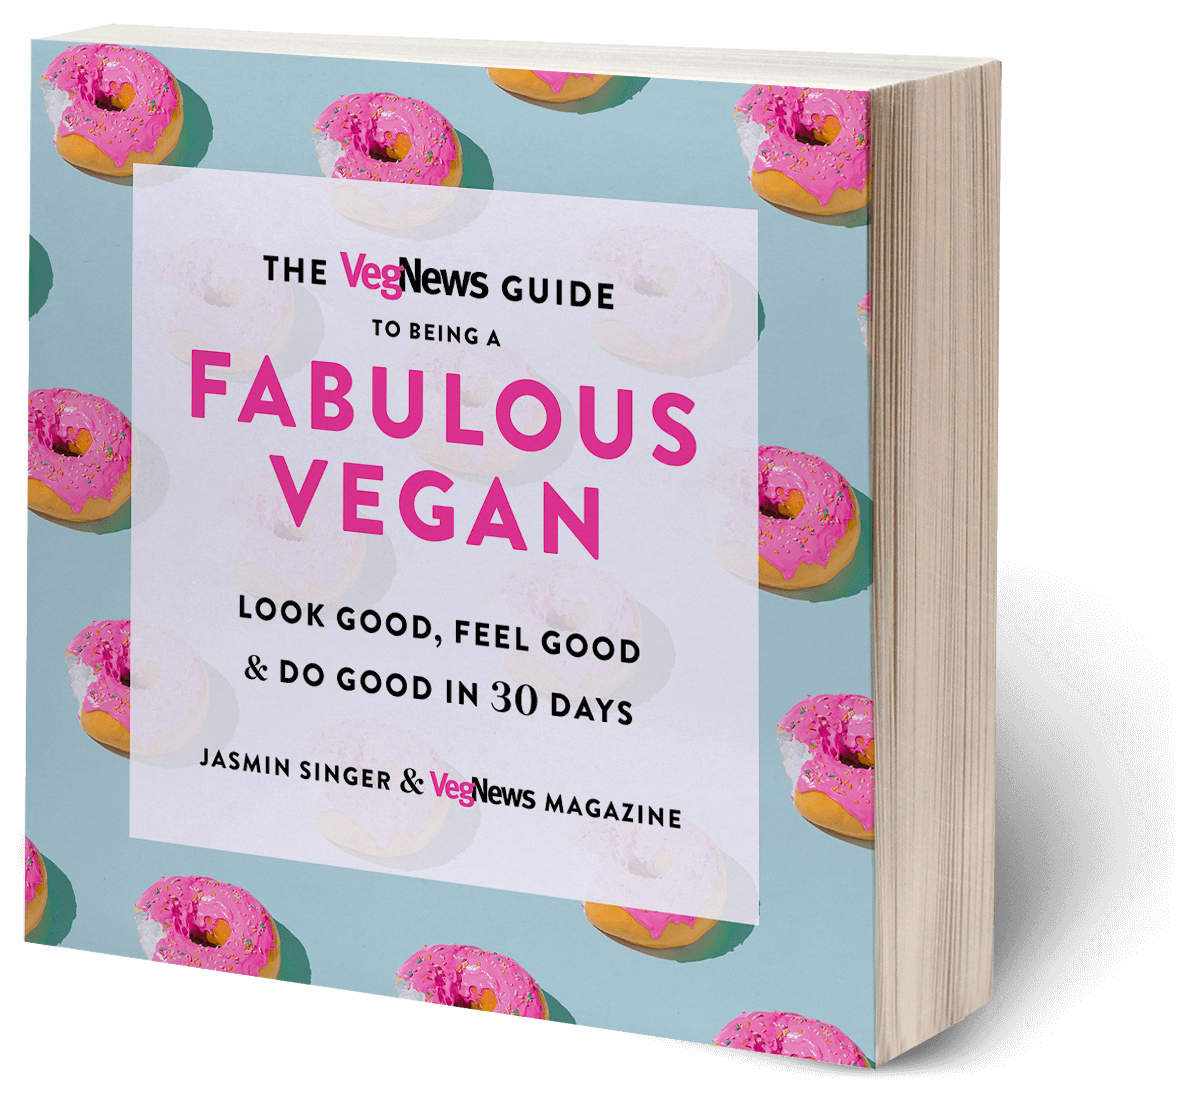 The VegNews Guide to Being a Fabulous Vegan: Look Good, Feel Good, & Do Good in 30 Days